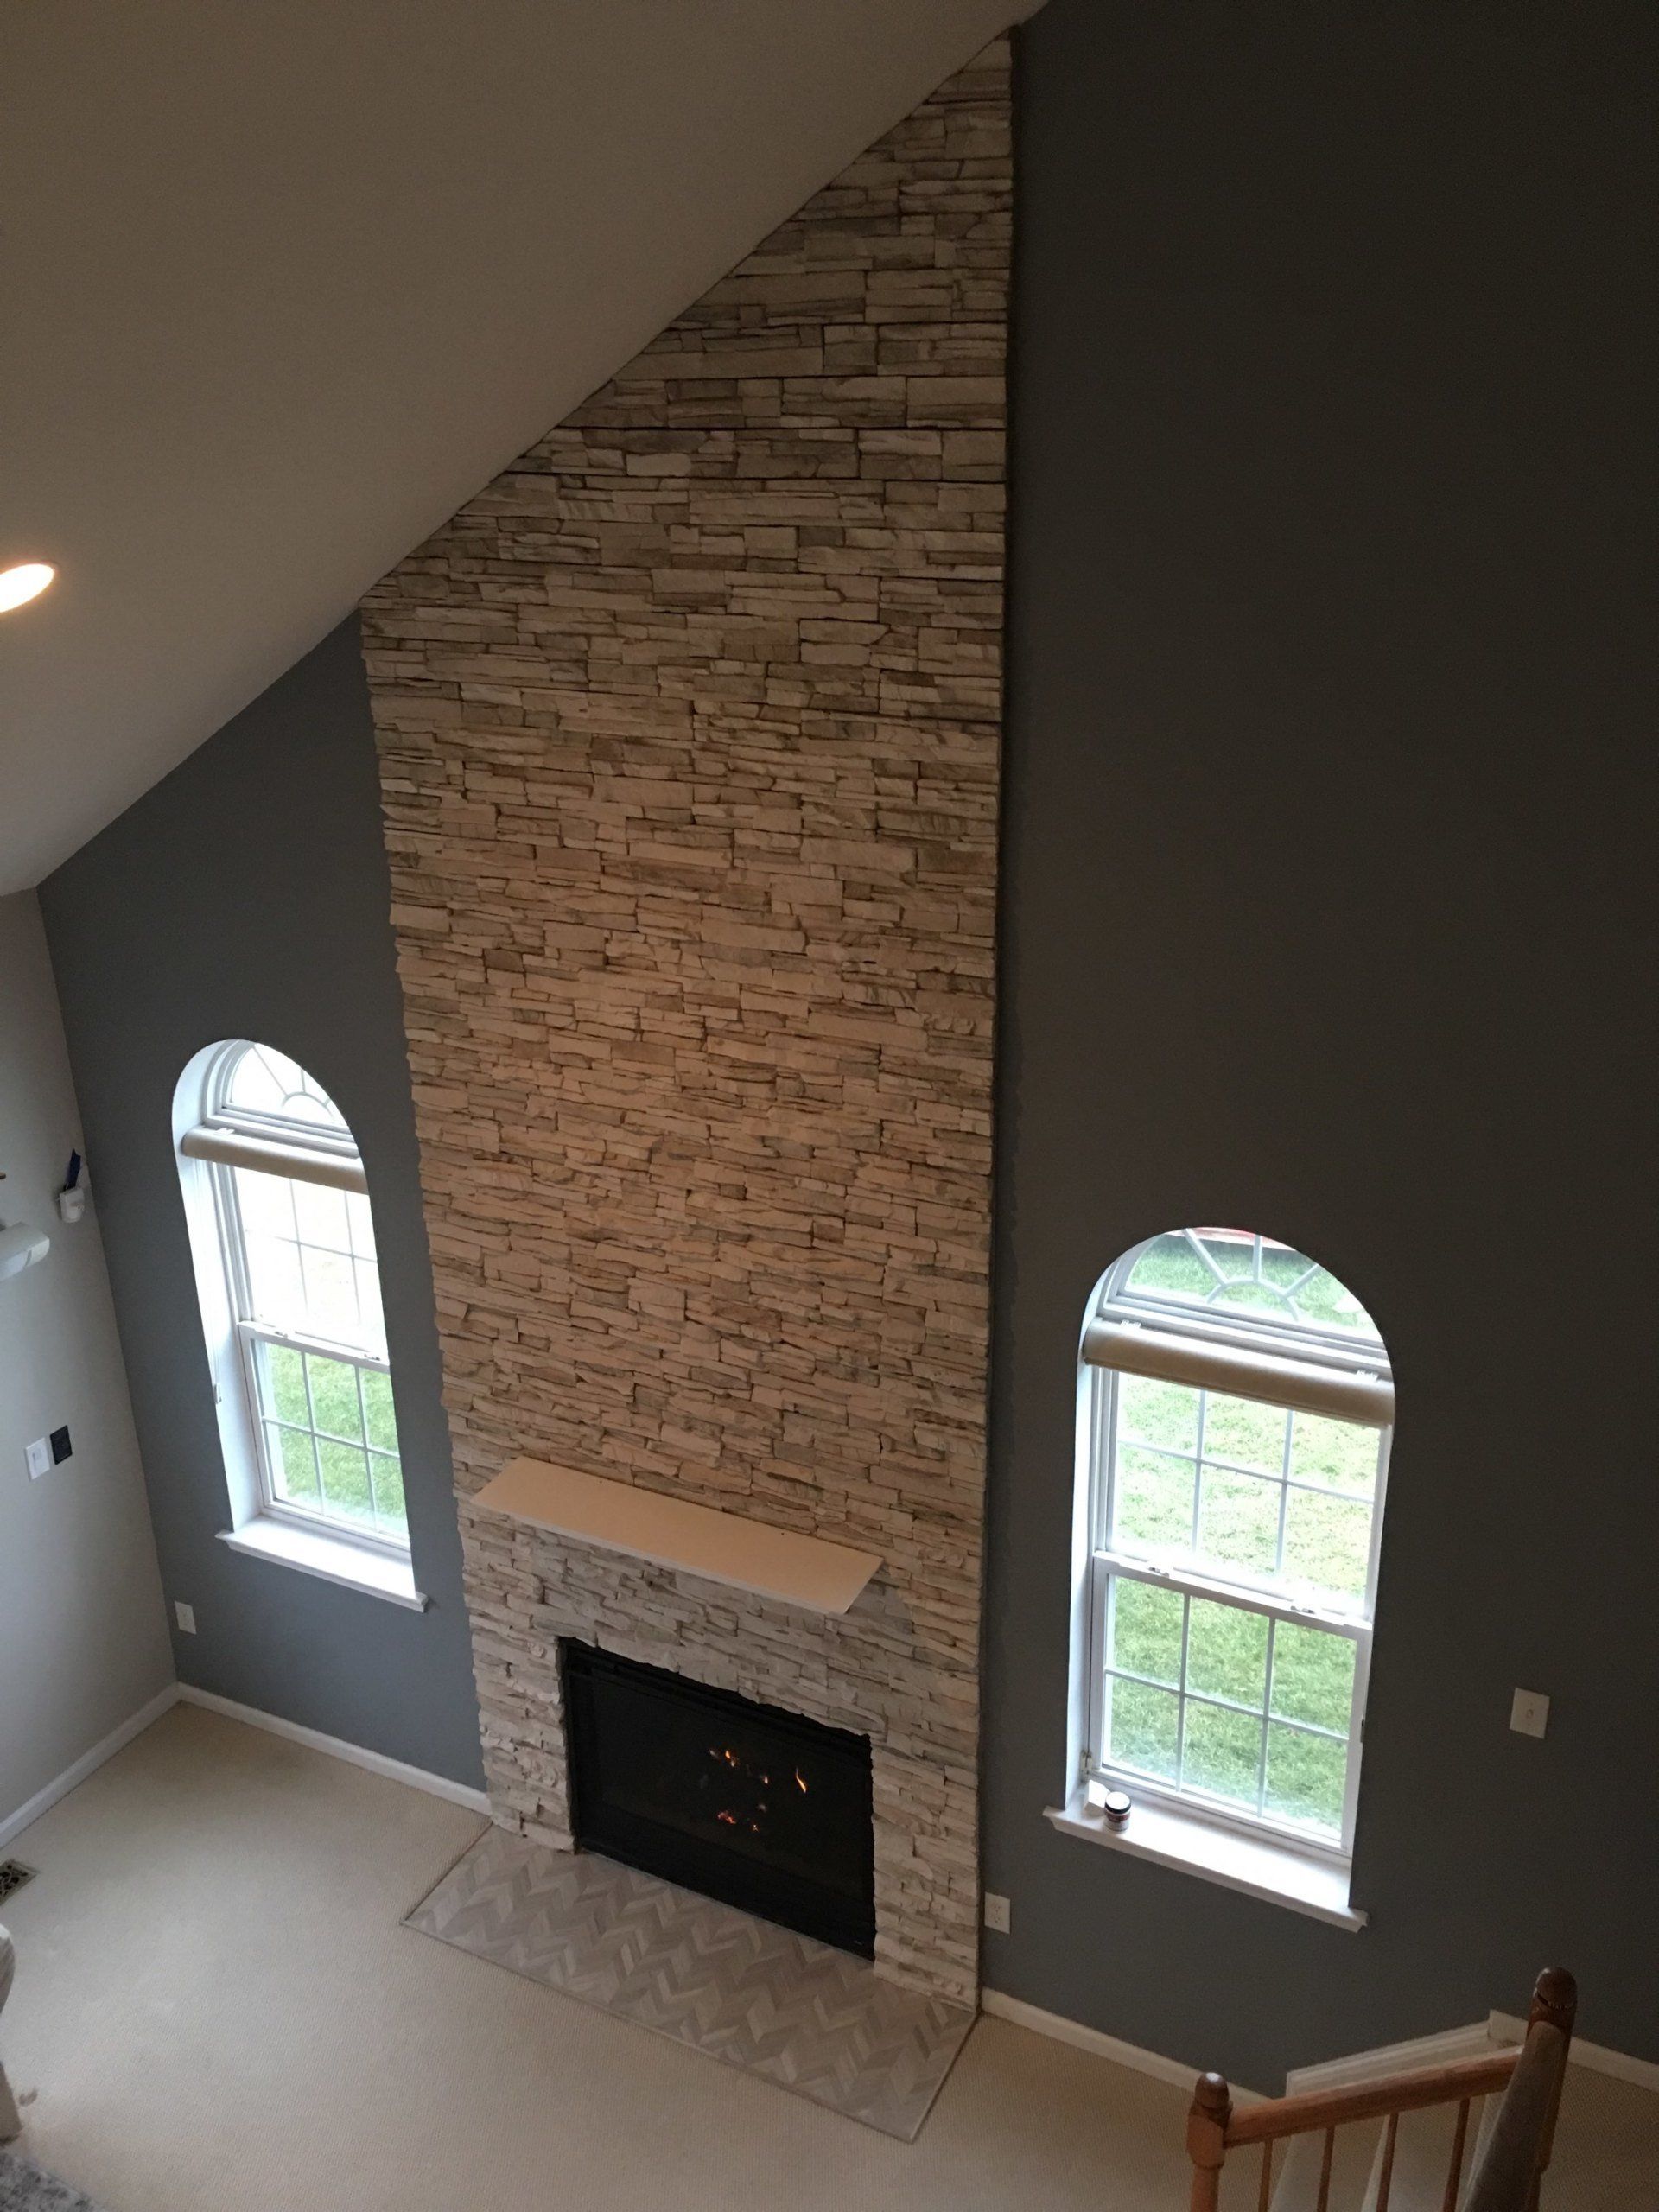 Daybreak stack stone fireplace with tile hearth